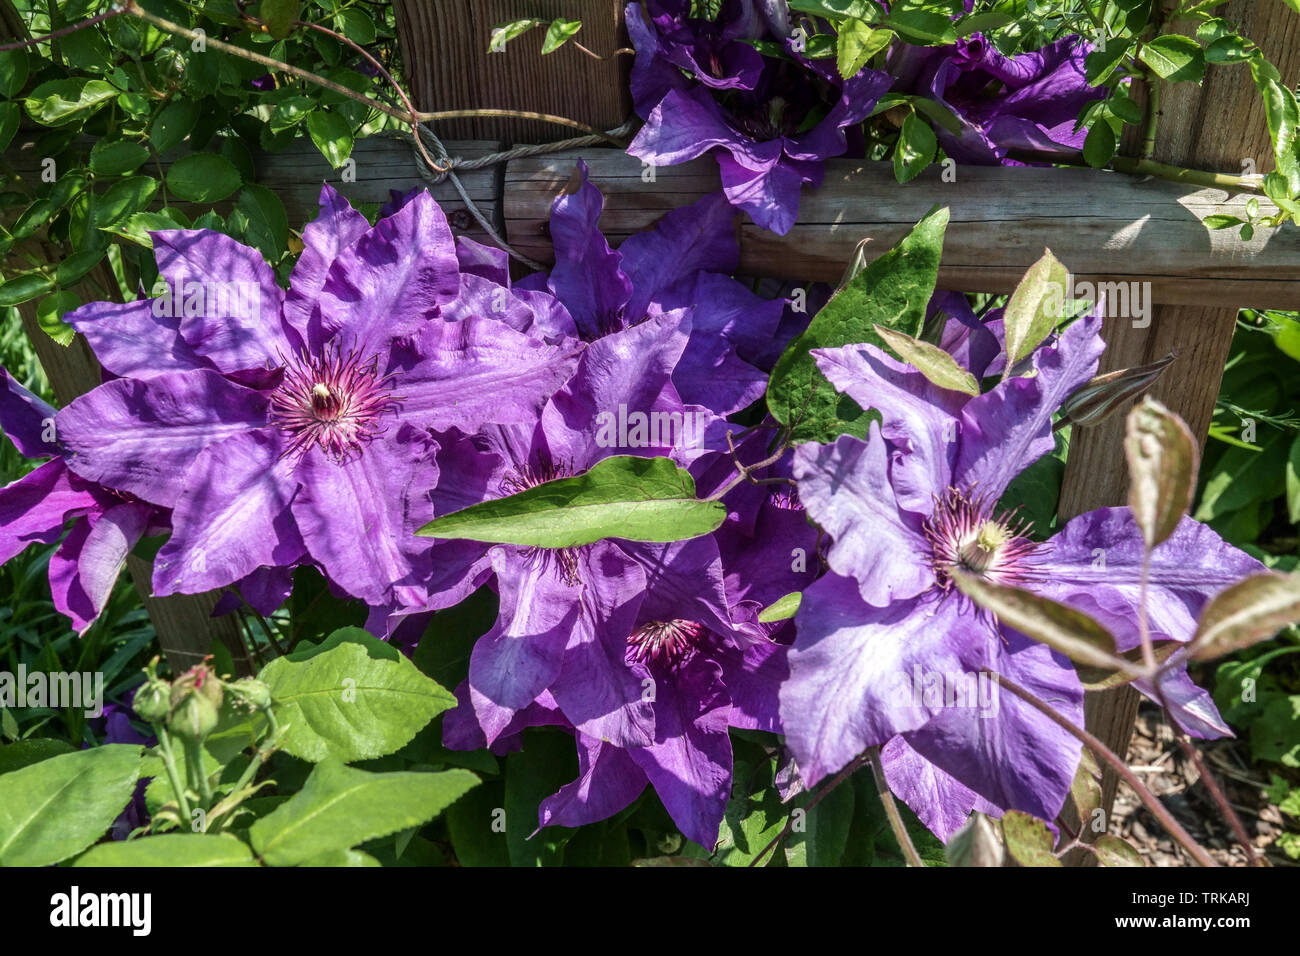 Clematis blue flower 'The President', growing on wooden fence in garden Stock Photo